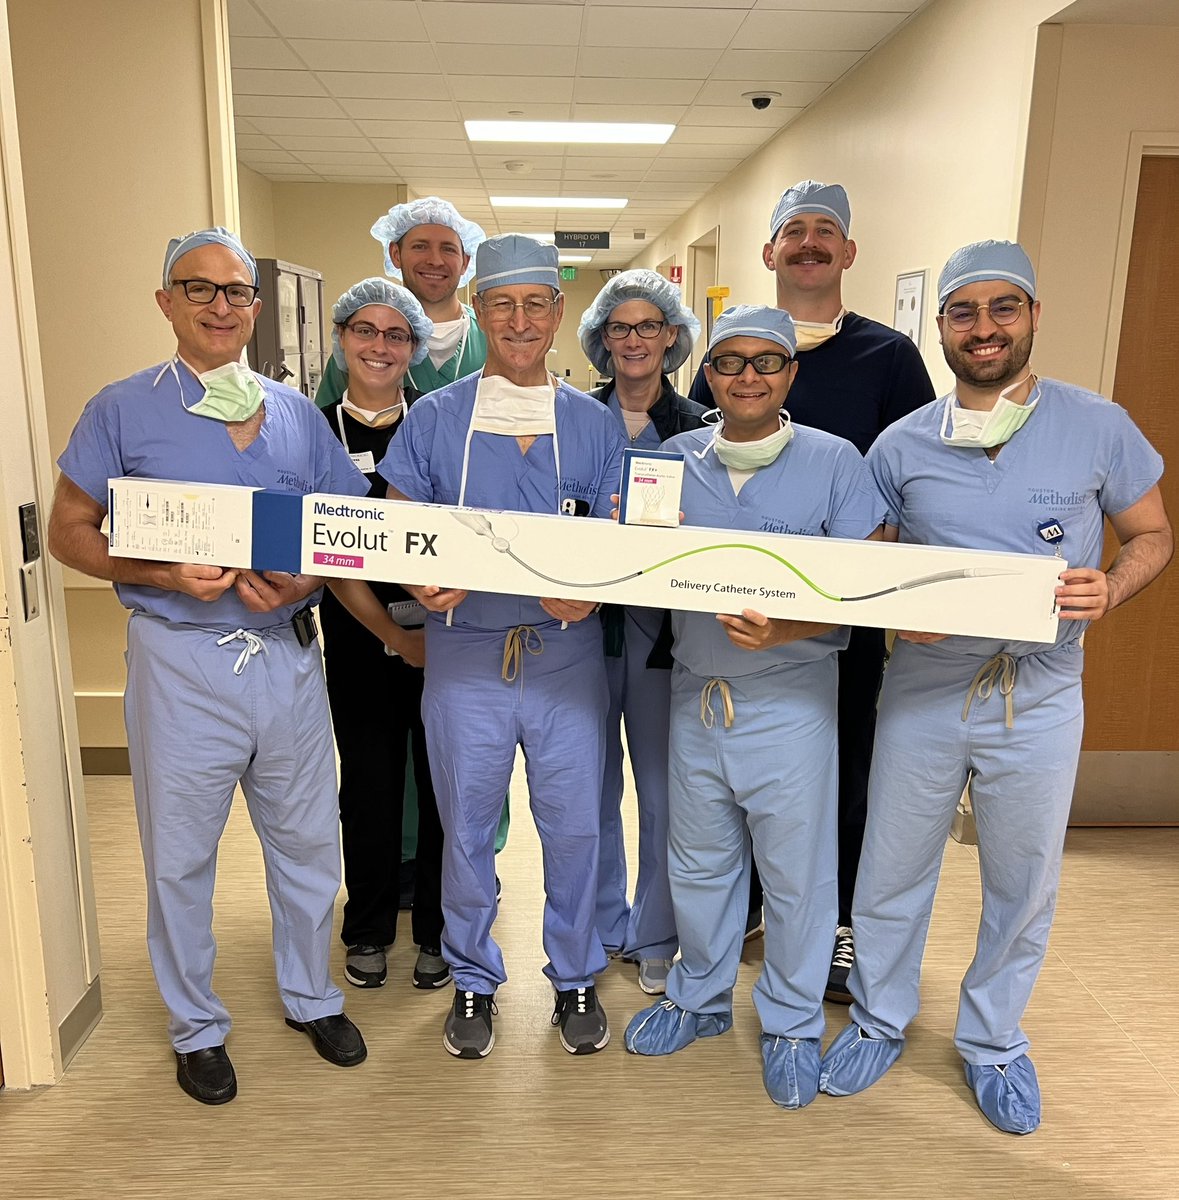 Our team performed one of the first TAVRs using the new Evolut FX + system this morning @SachinGoelMD @MReardon19 and Neal Kleiman @HMethodistCV @WilliamZoghbi @NadeenFaza @SLittleMD #Cardiology #CardioTwitter